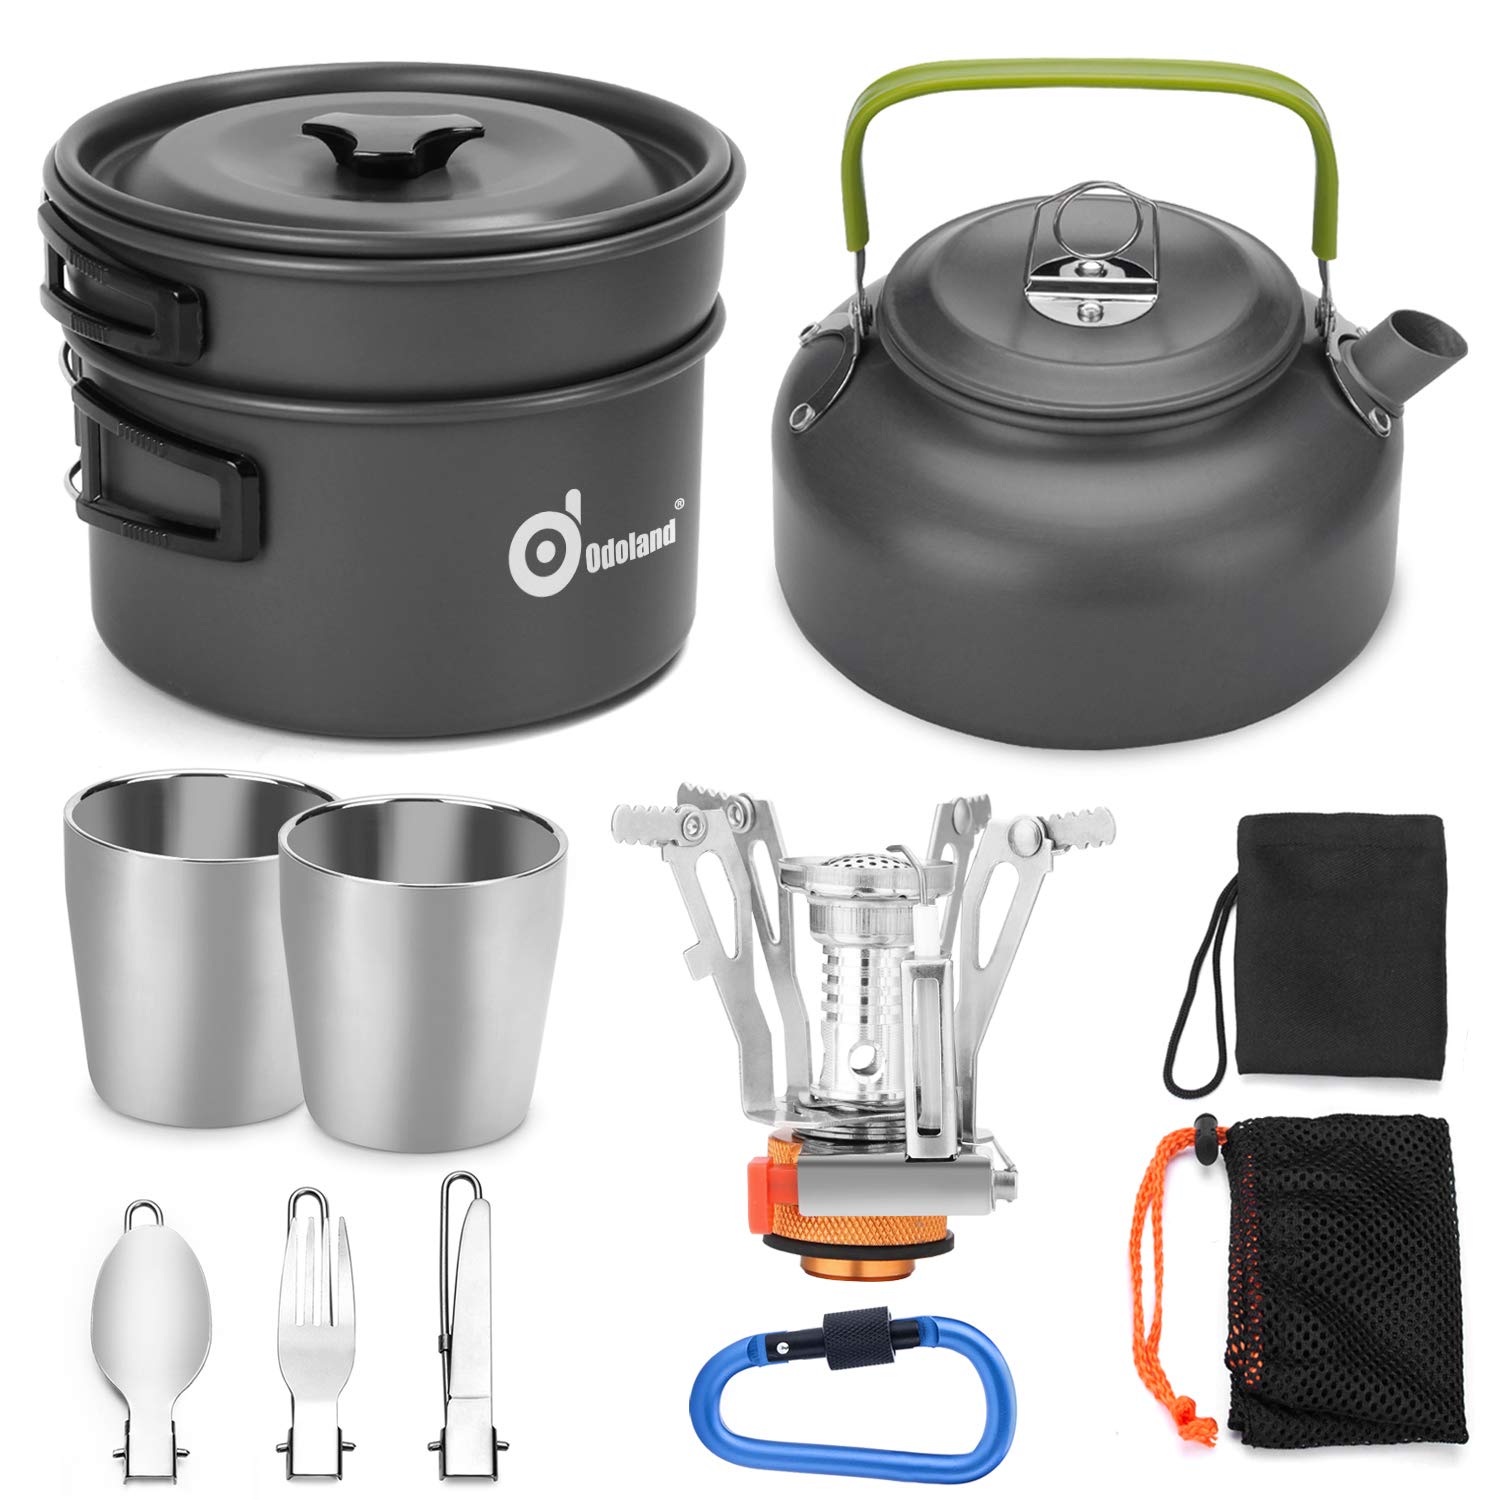 Odoland Camping Cooker Pan Set Aluminum Camping Cookware Kit for 2 People, Portable Outdoor Pot Pan Stove Kettle 2 Cups and Tableware - Backpacking Cookware for Picnic Trekking and Hiking